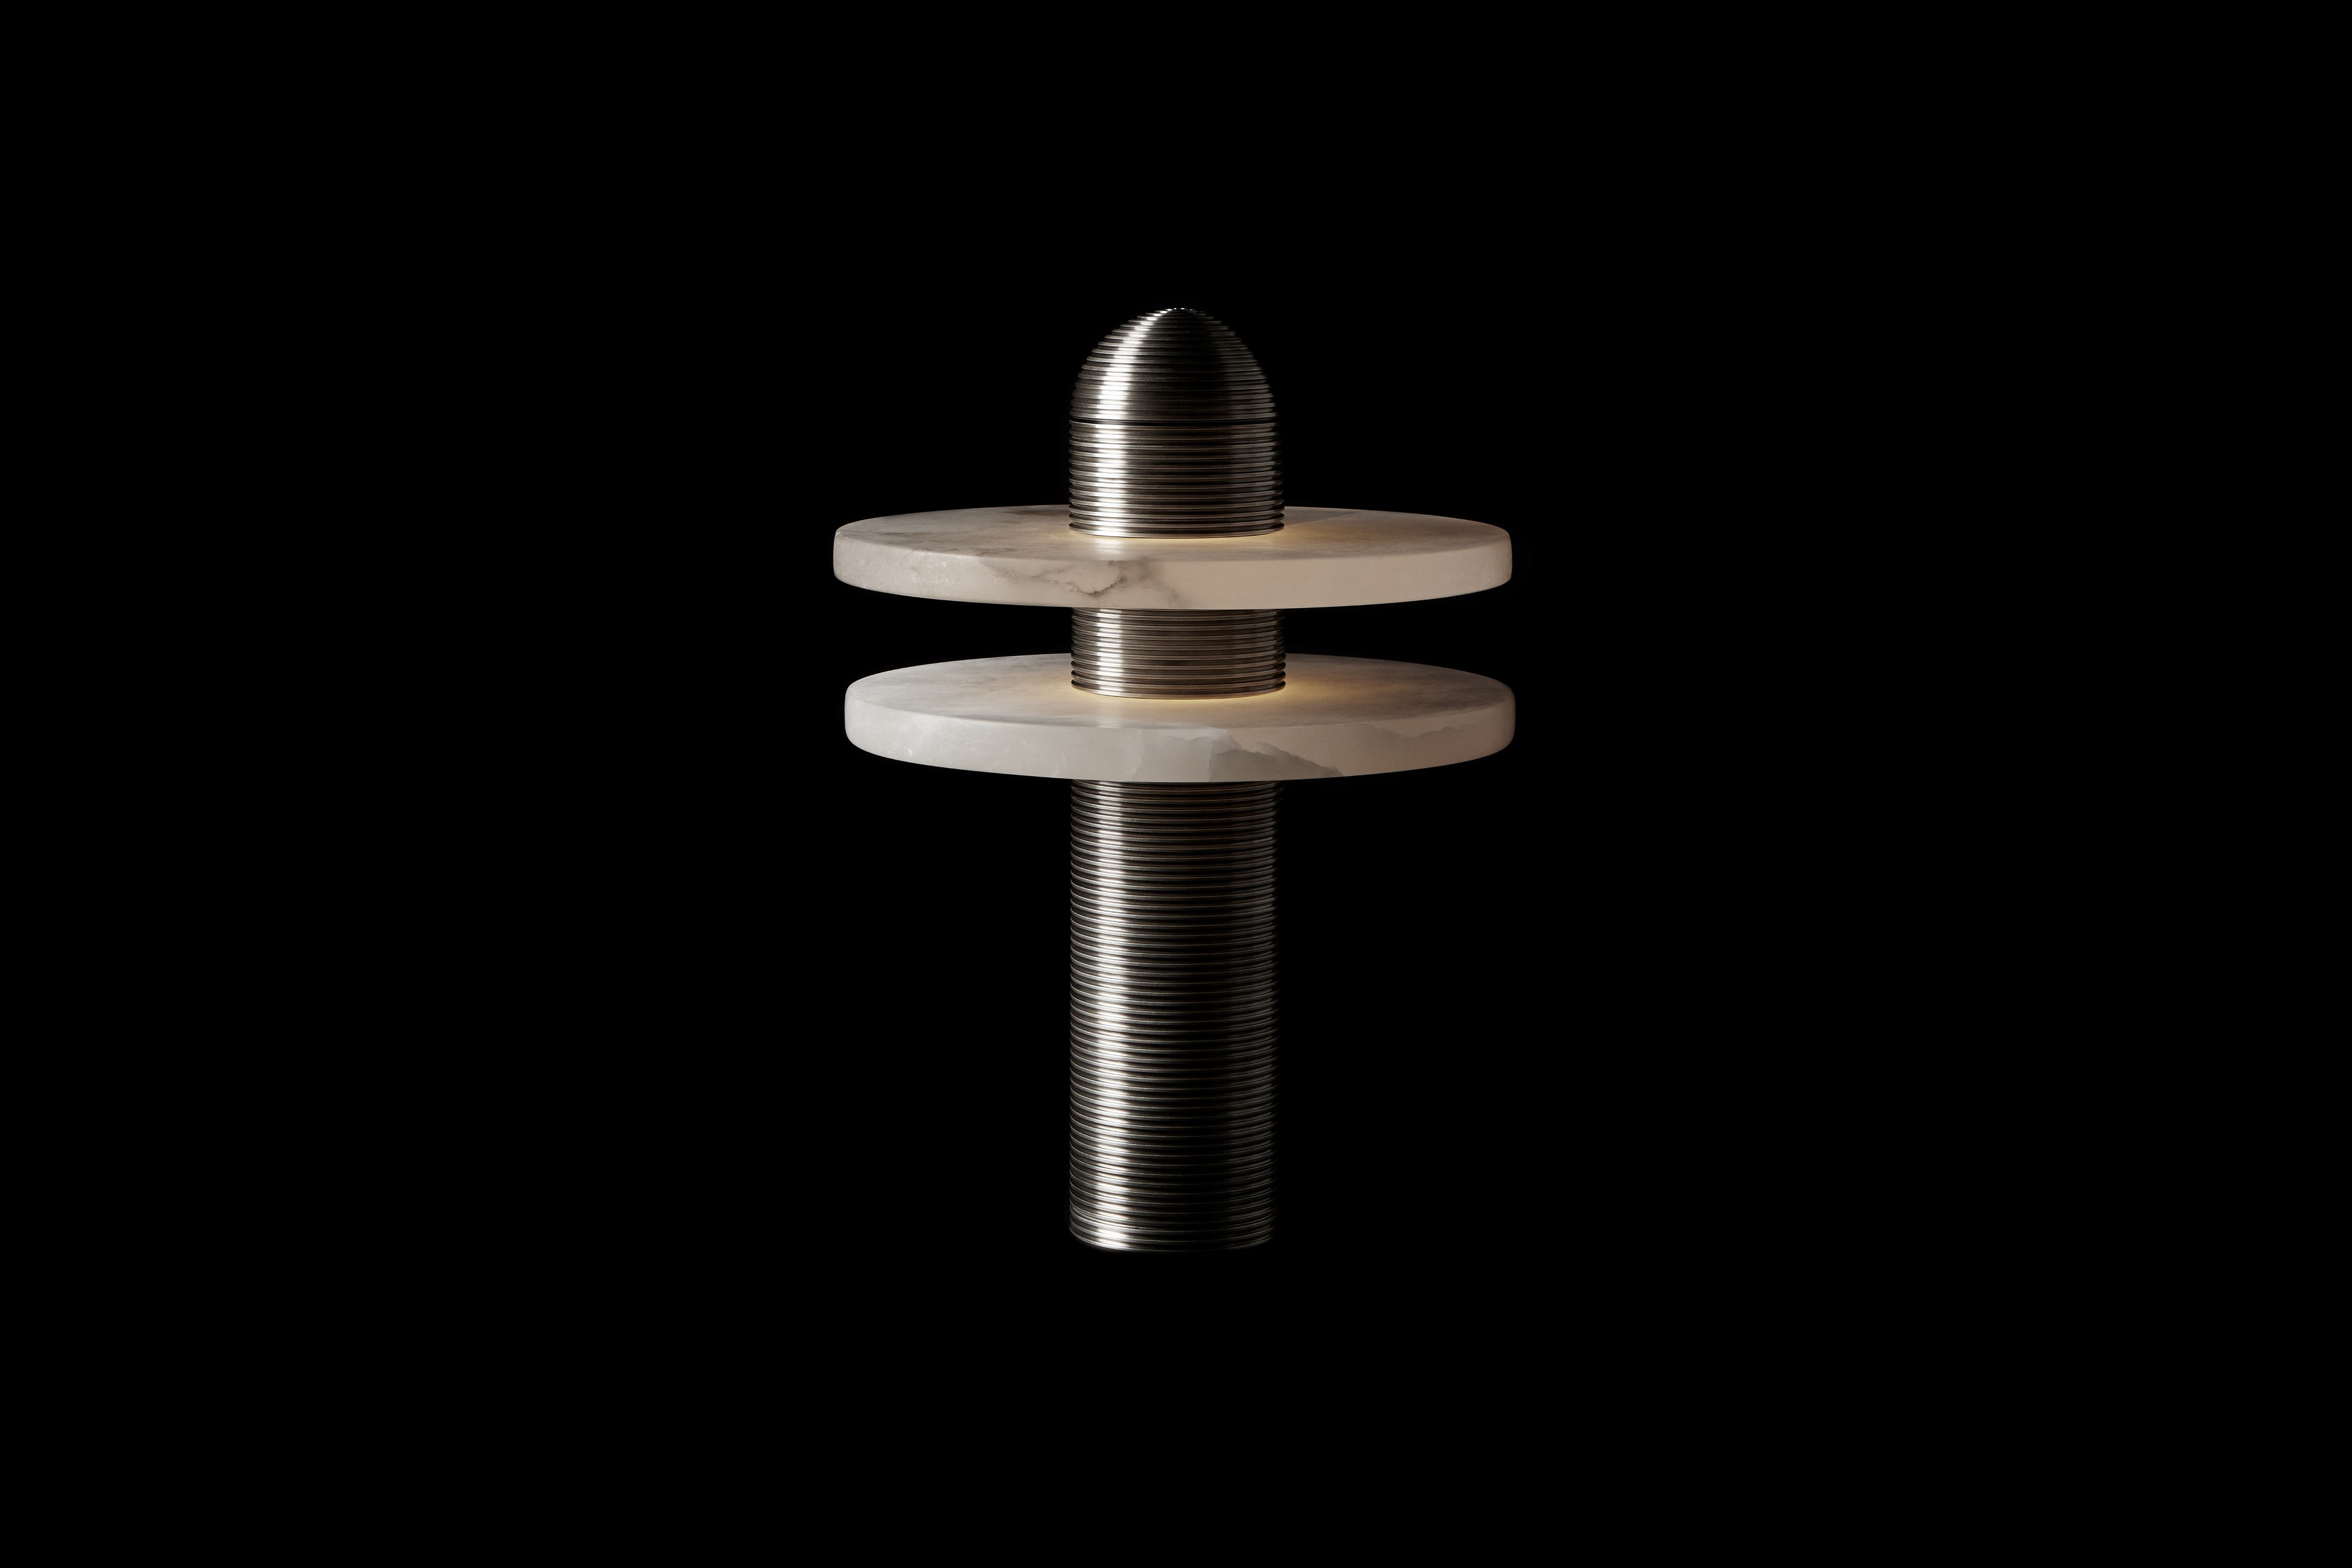 a metal object on a black background